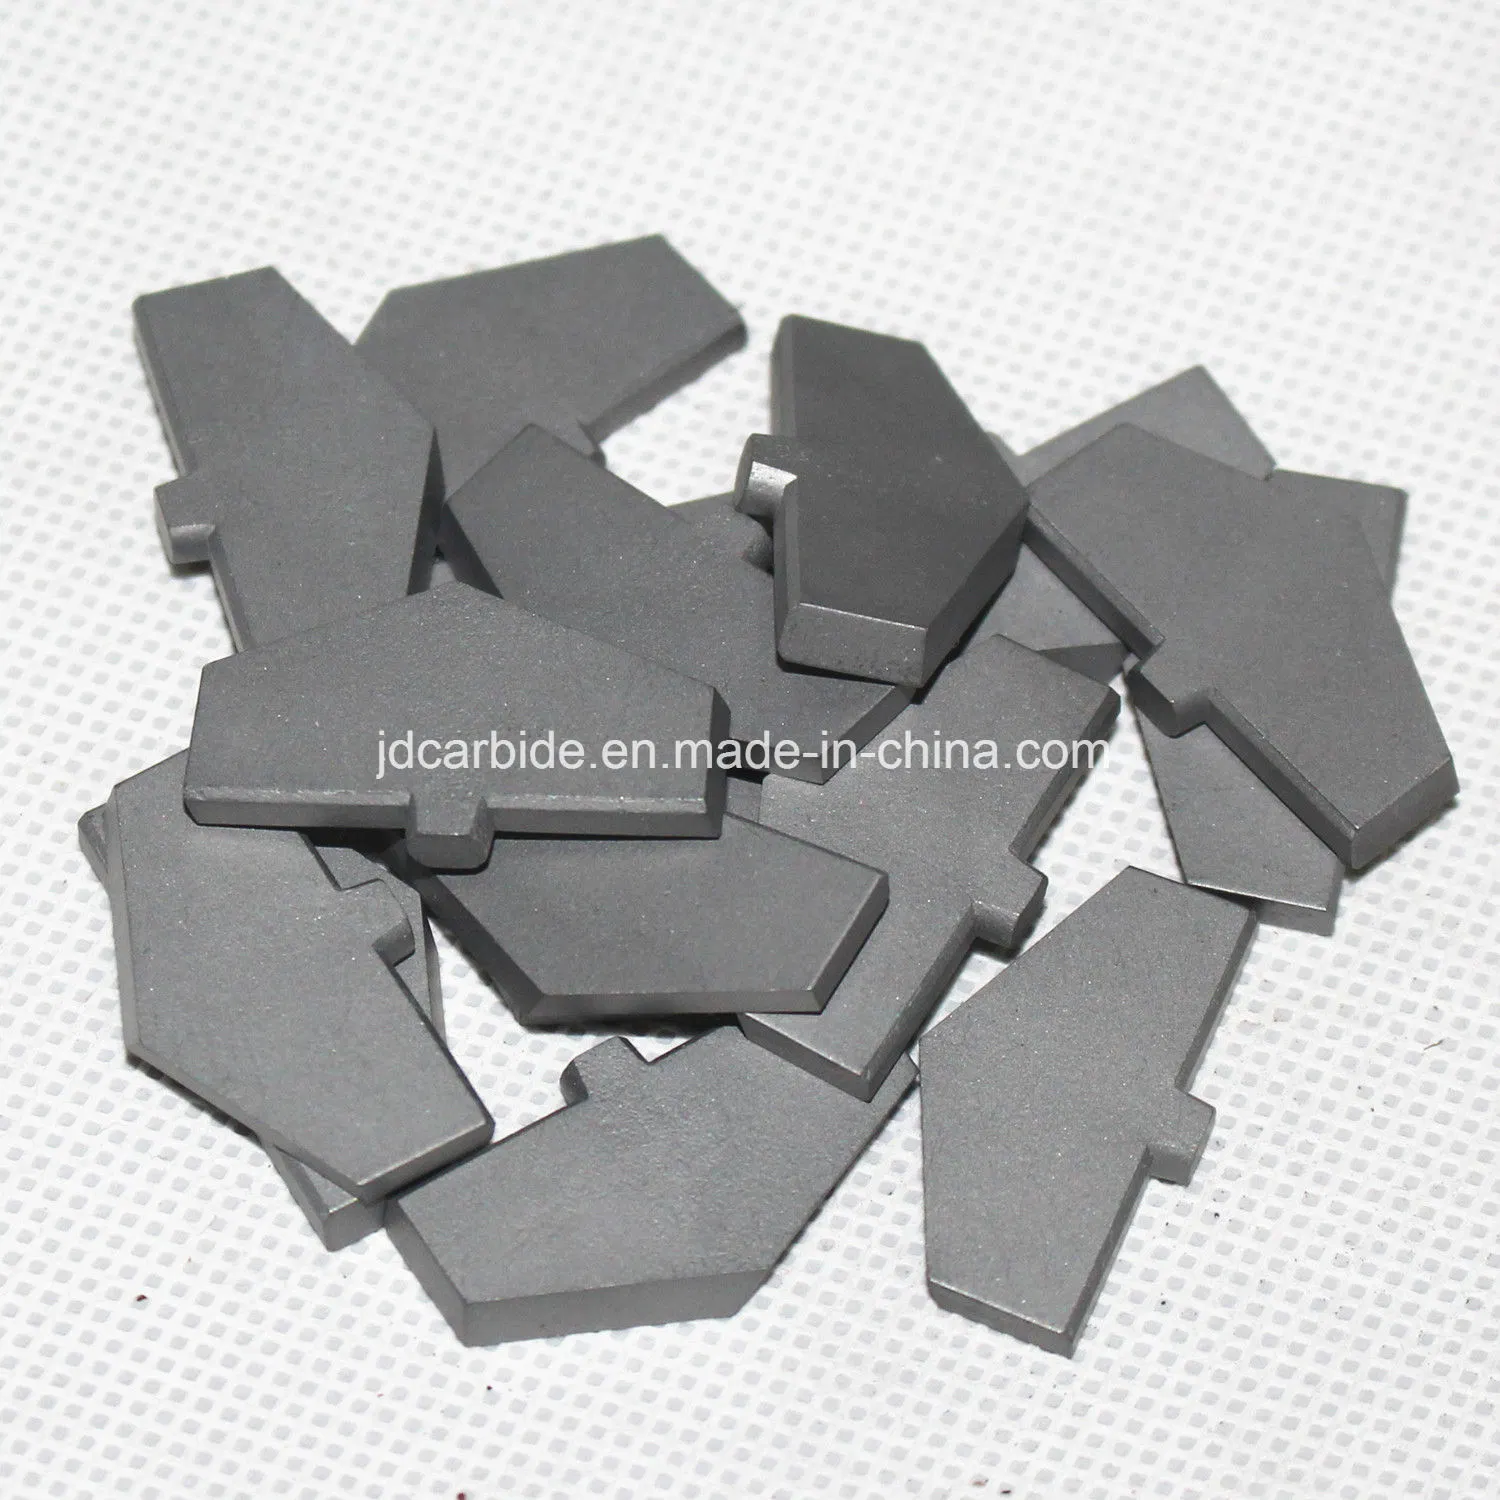 New Product of Tungsten Carbide Weld Parts